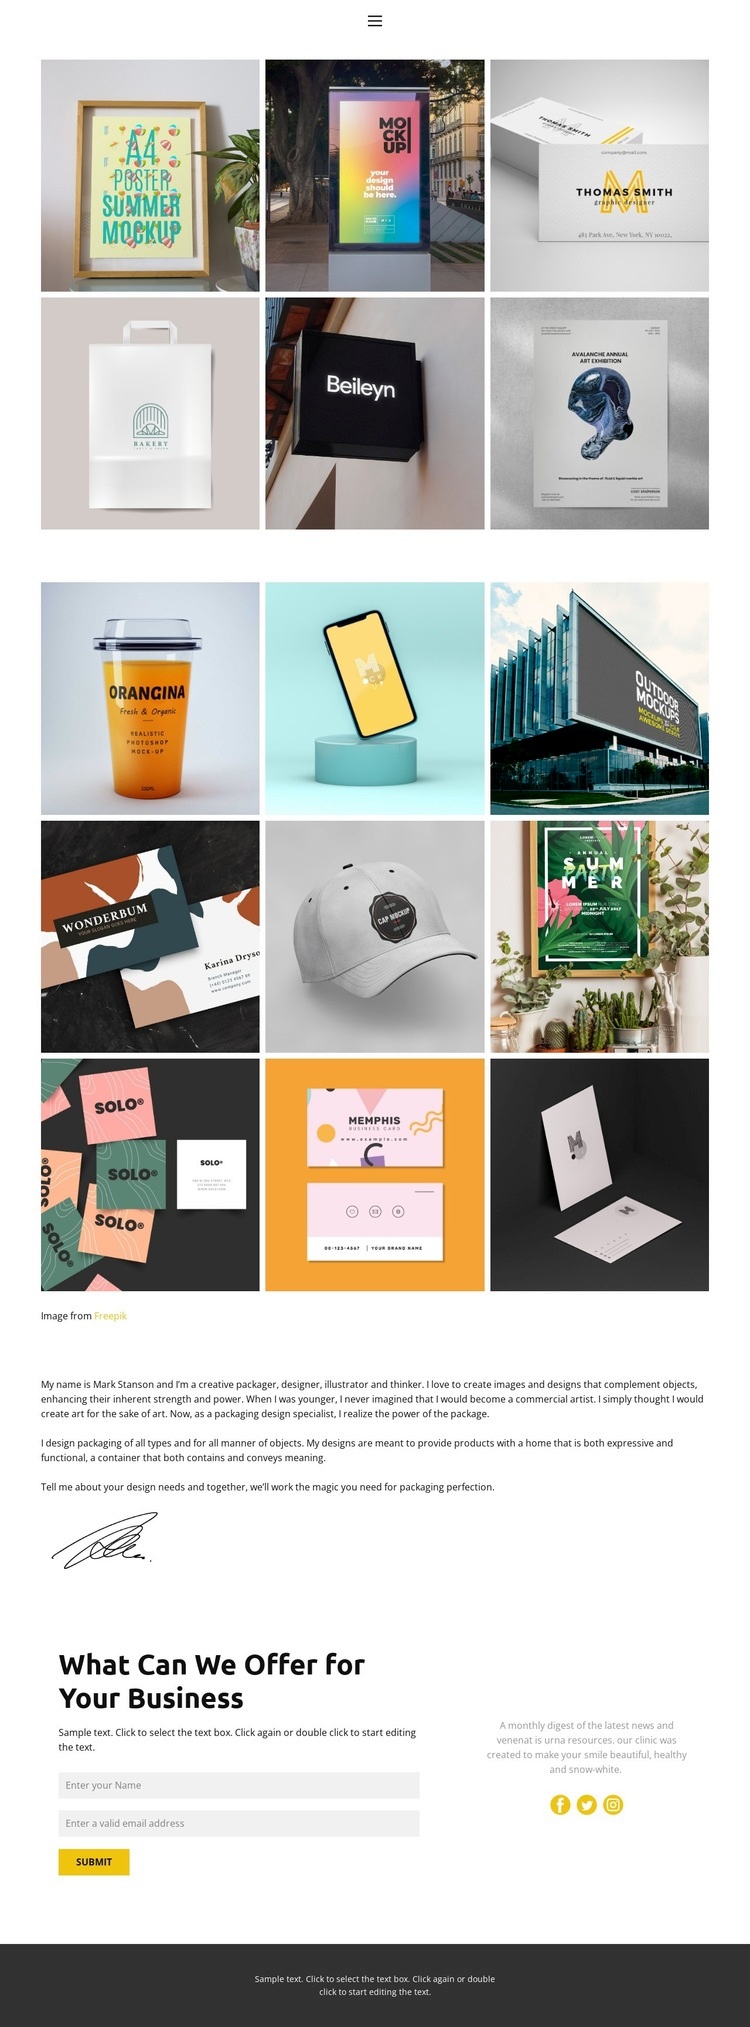 Gallery with the best projects Squarespace Template Alternative